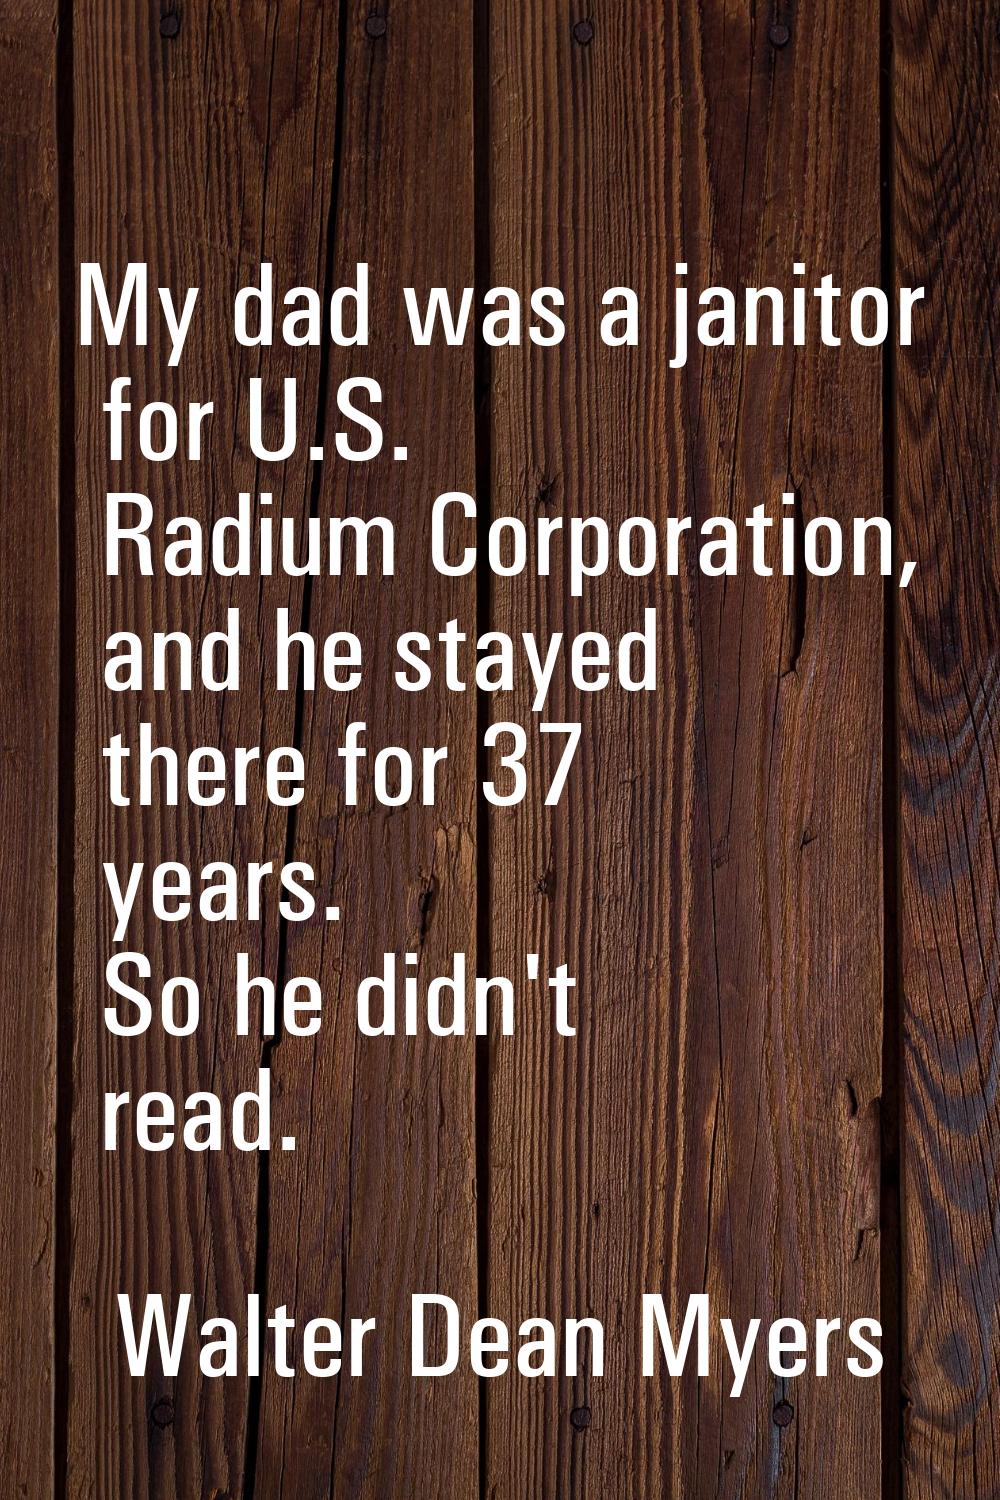 My dad was a janitor for U.S. Radium Corporation, and he stayed there for 37 years. So he didn't re